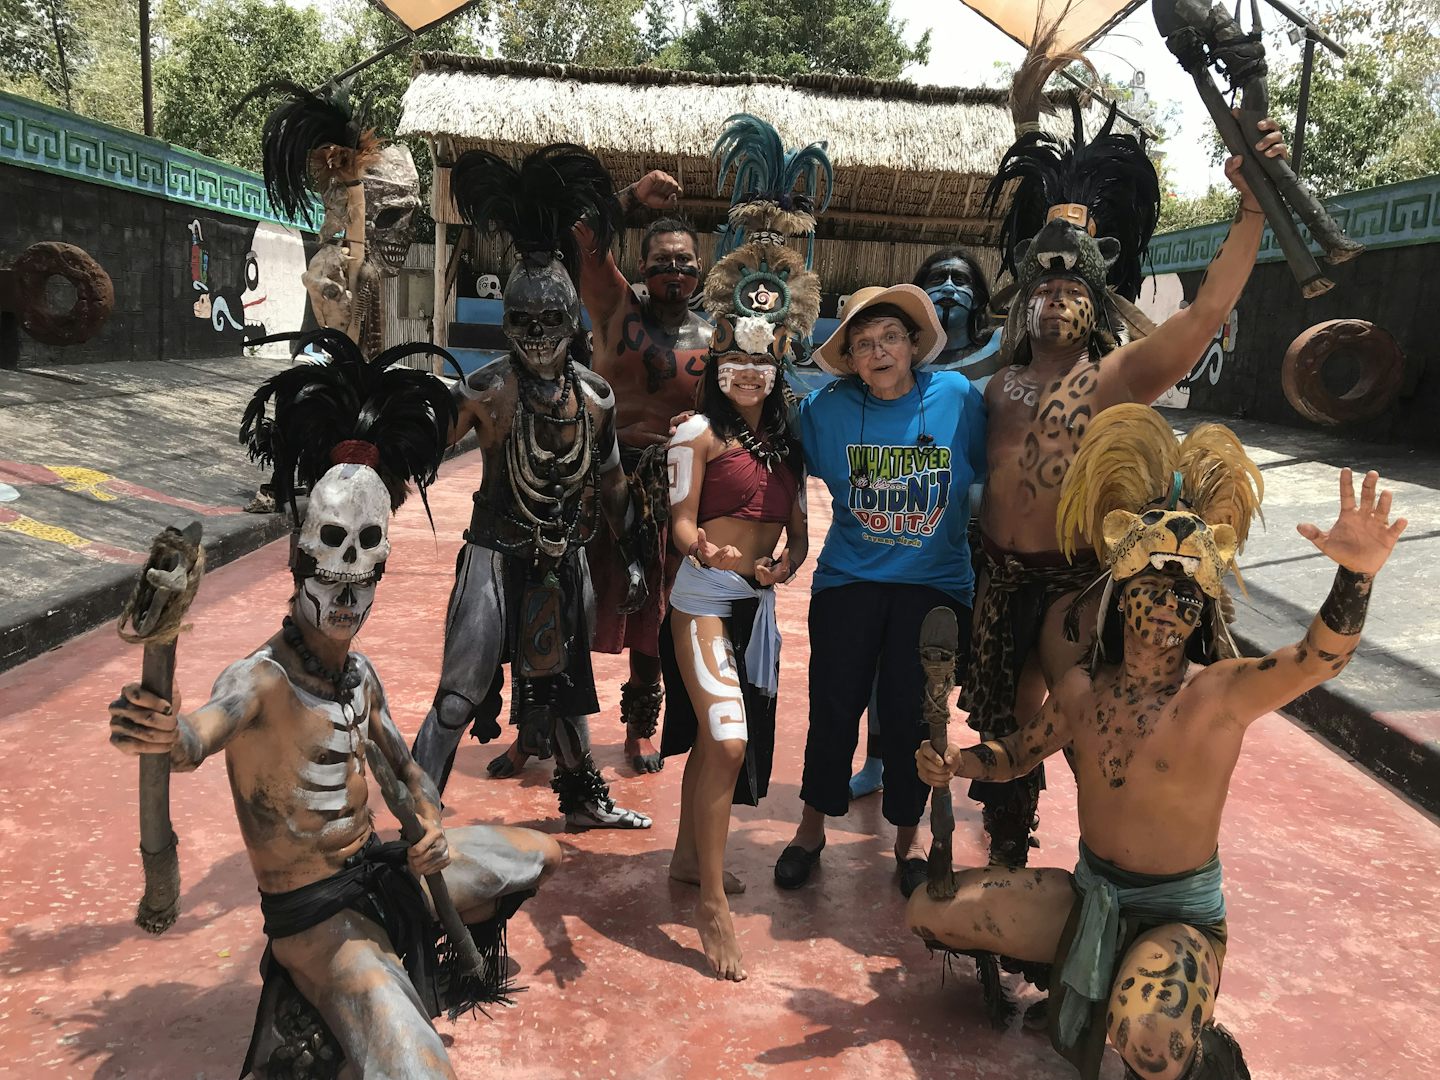 Made new friends in Cozumel. My team WON the right to jump into volcano and wrestle the underworld for return of the sun! They say they musta liked it down there, because no one ever returned!